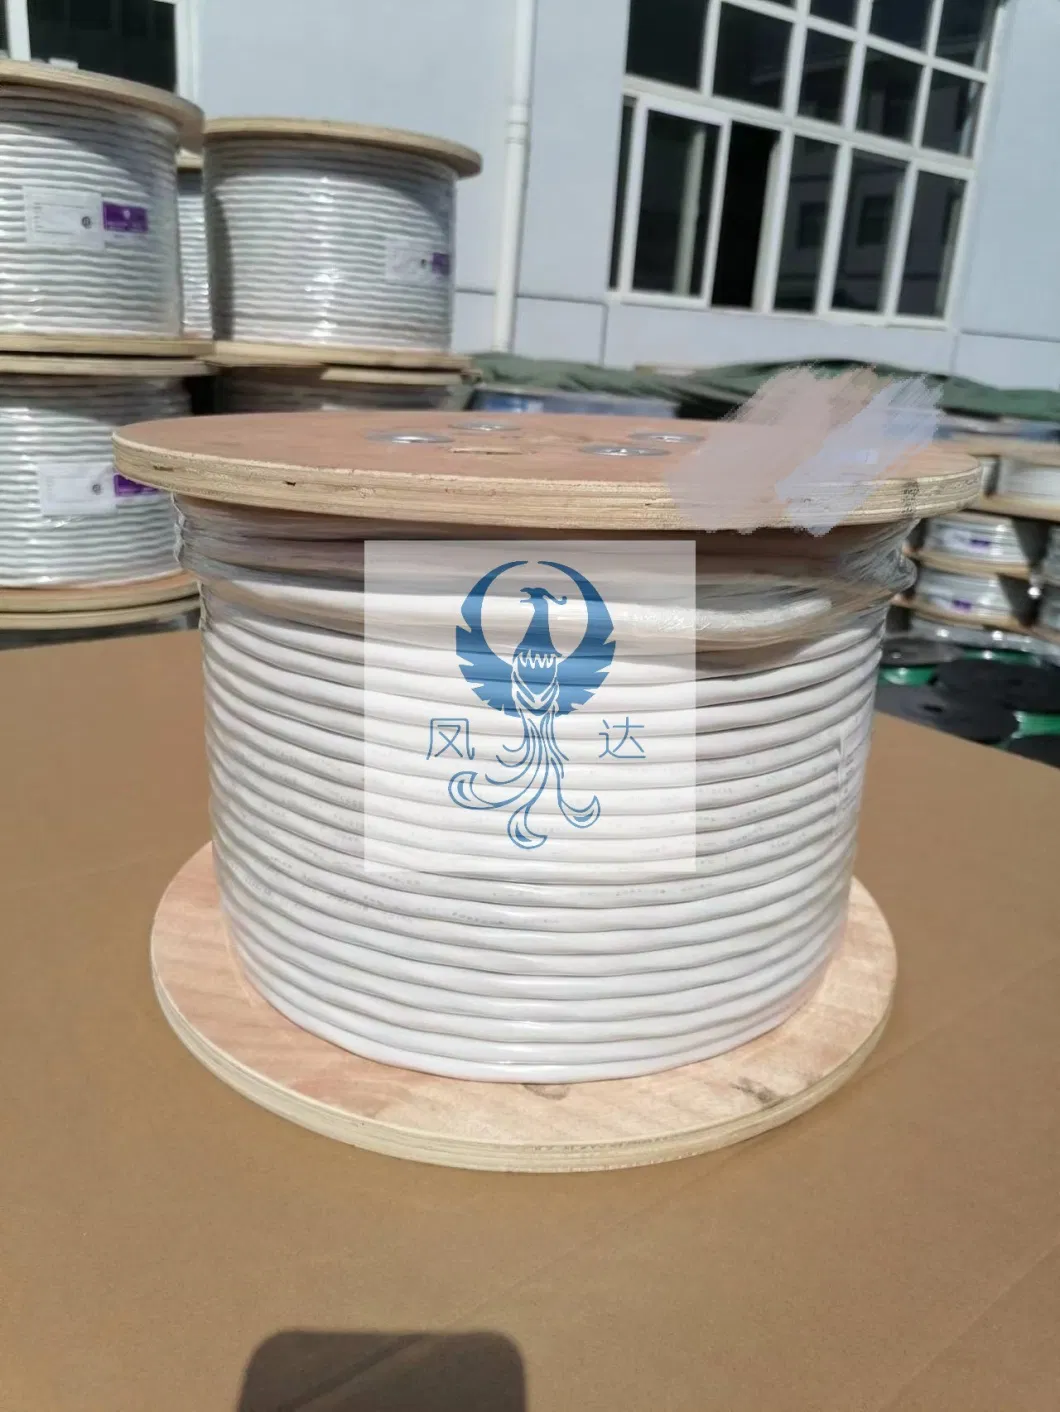 CSA Electrical Wire 300V Nmd90 Residential Wires 14/2 Copper or Aluminium Solid Conductor Indoor Non-Metallic Cable